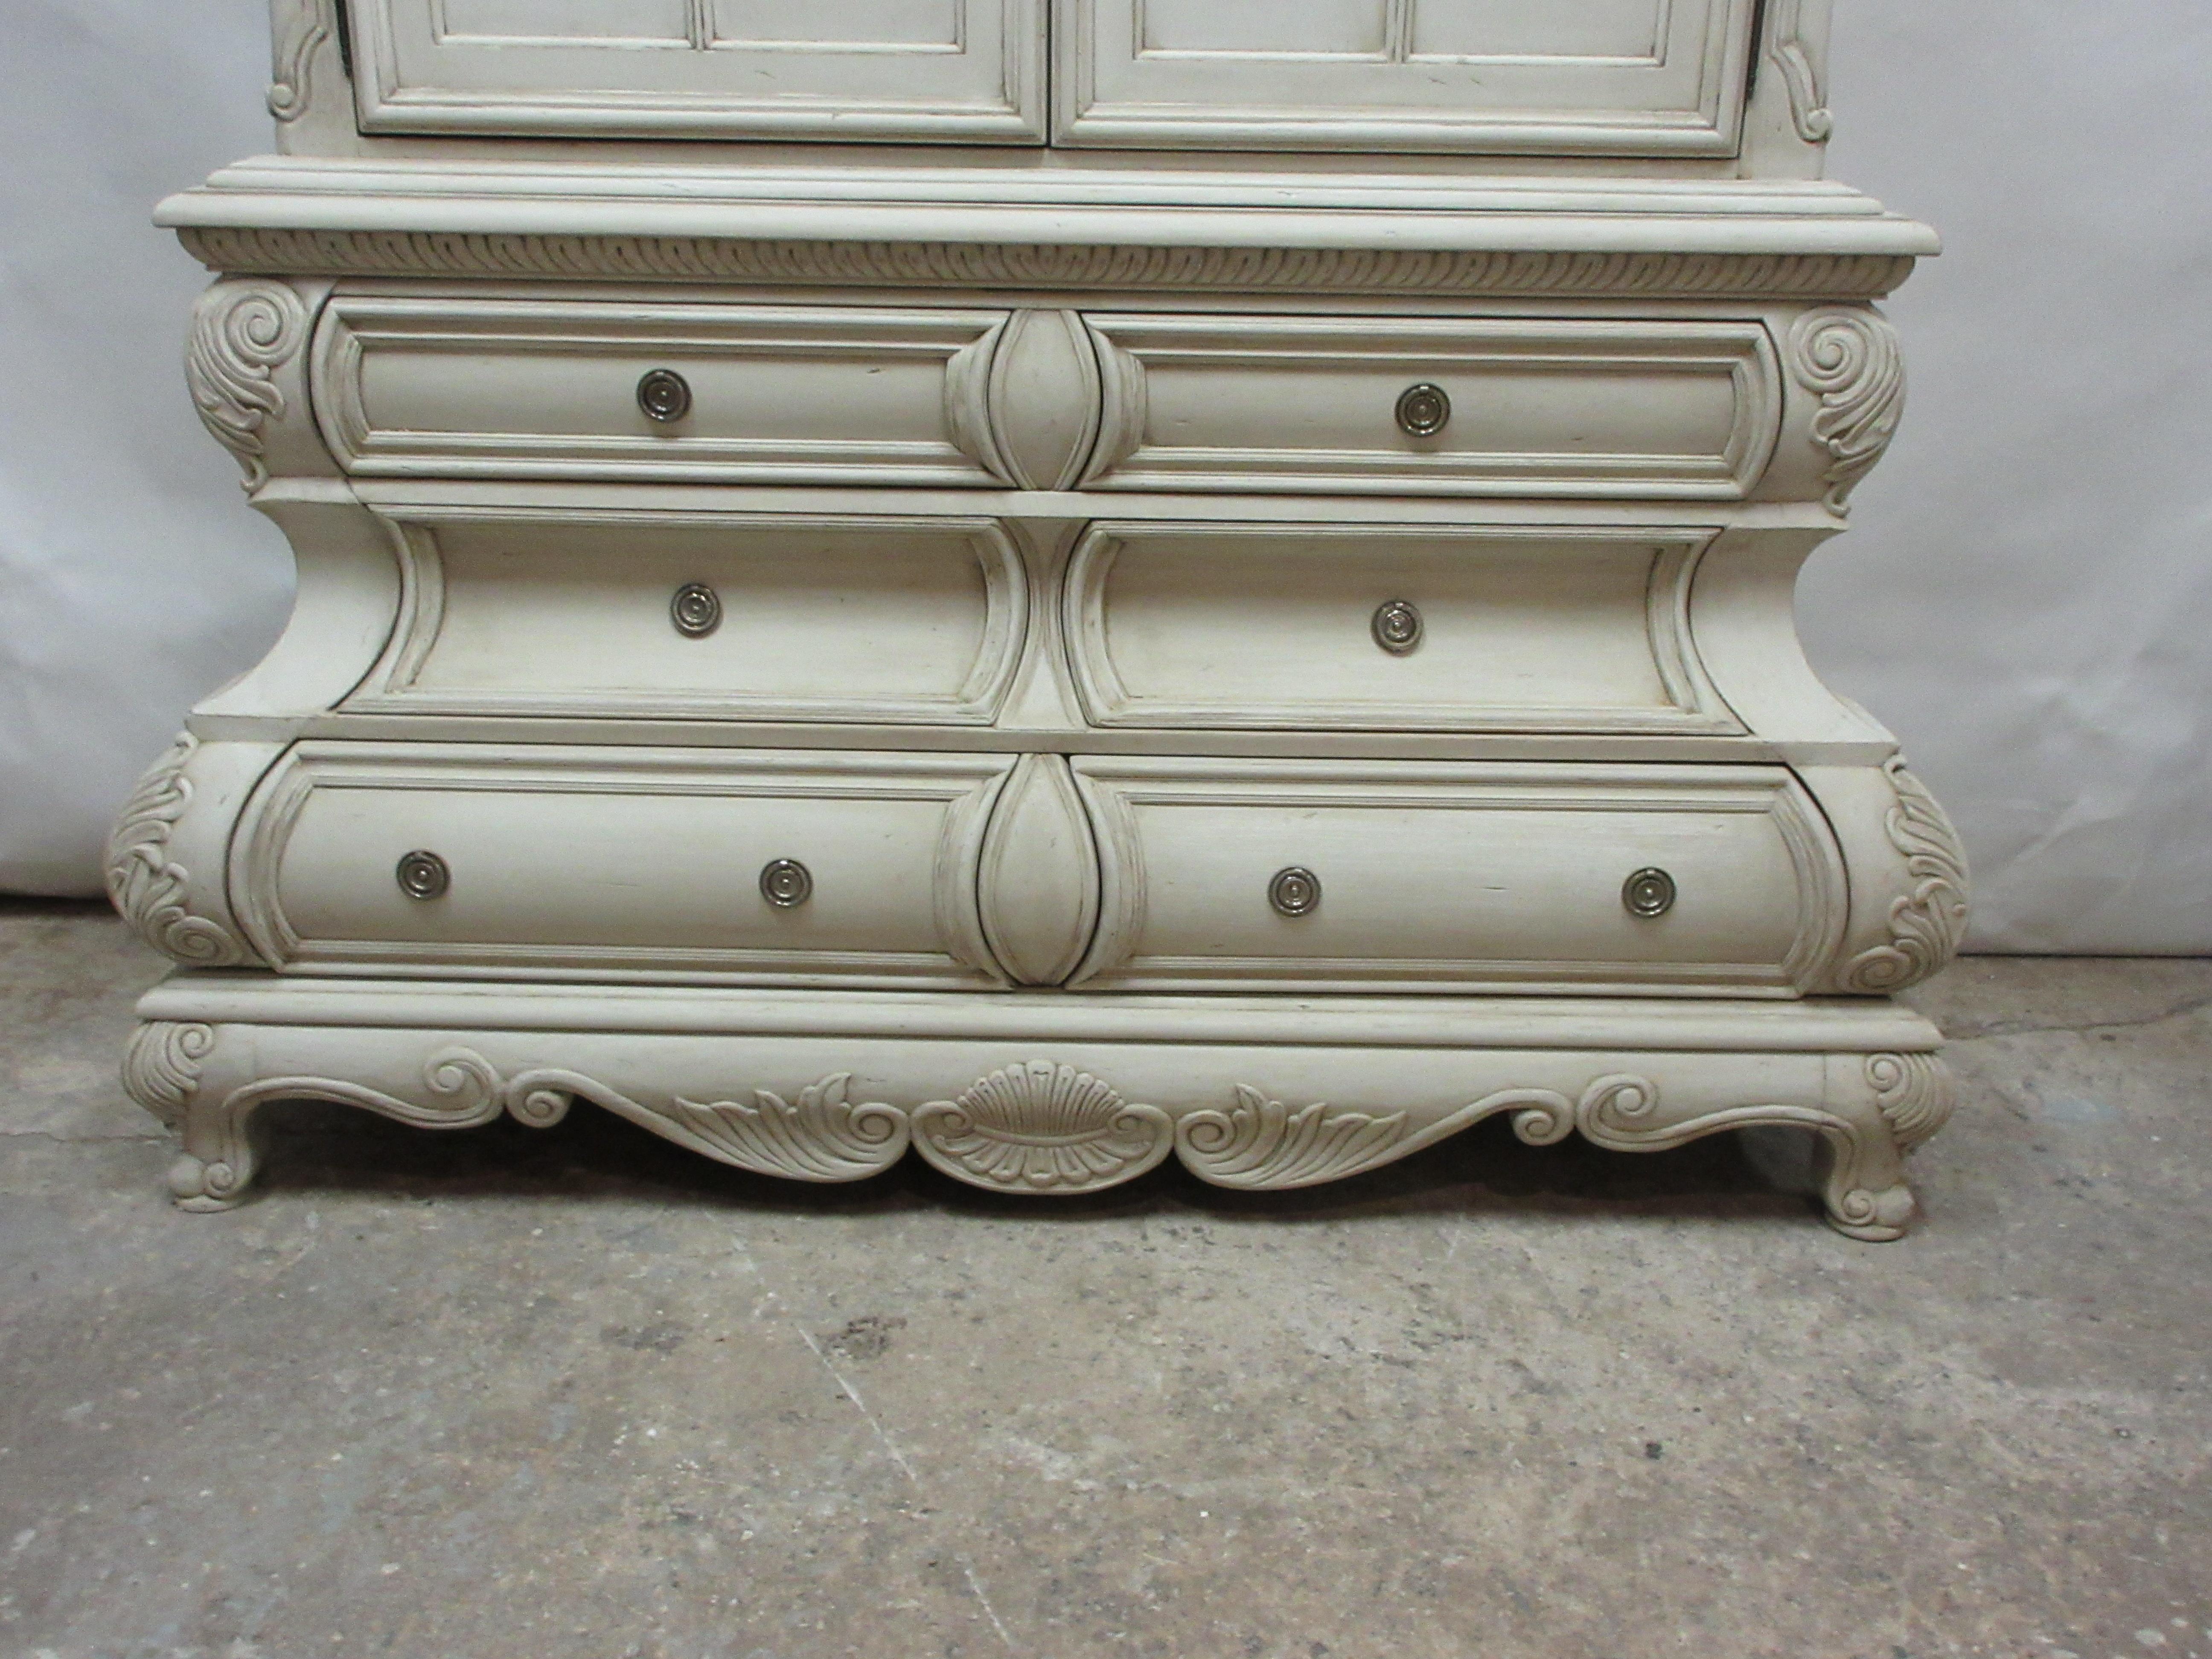 This is a very large Bombay armoire, its been fully restored and repainted with milk paints 